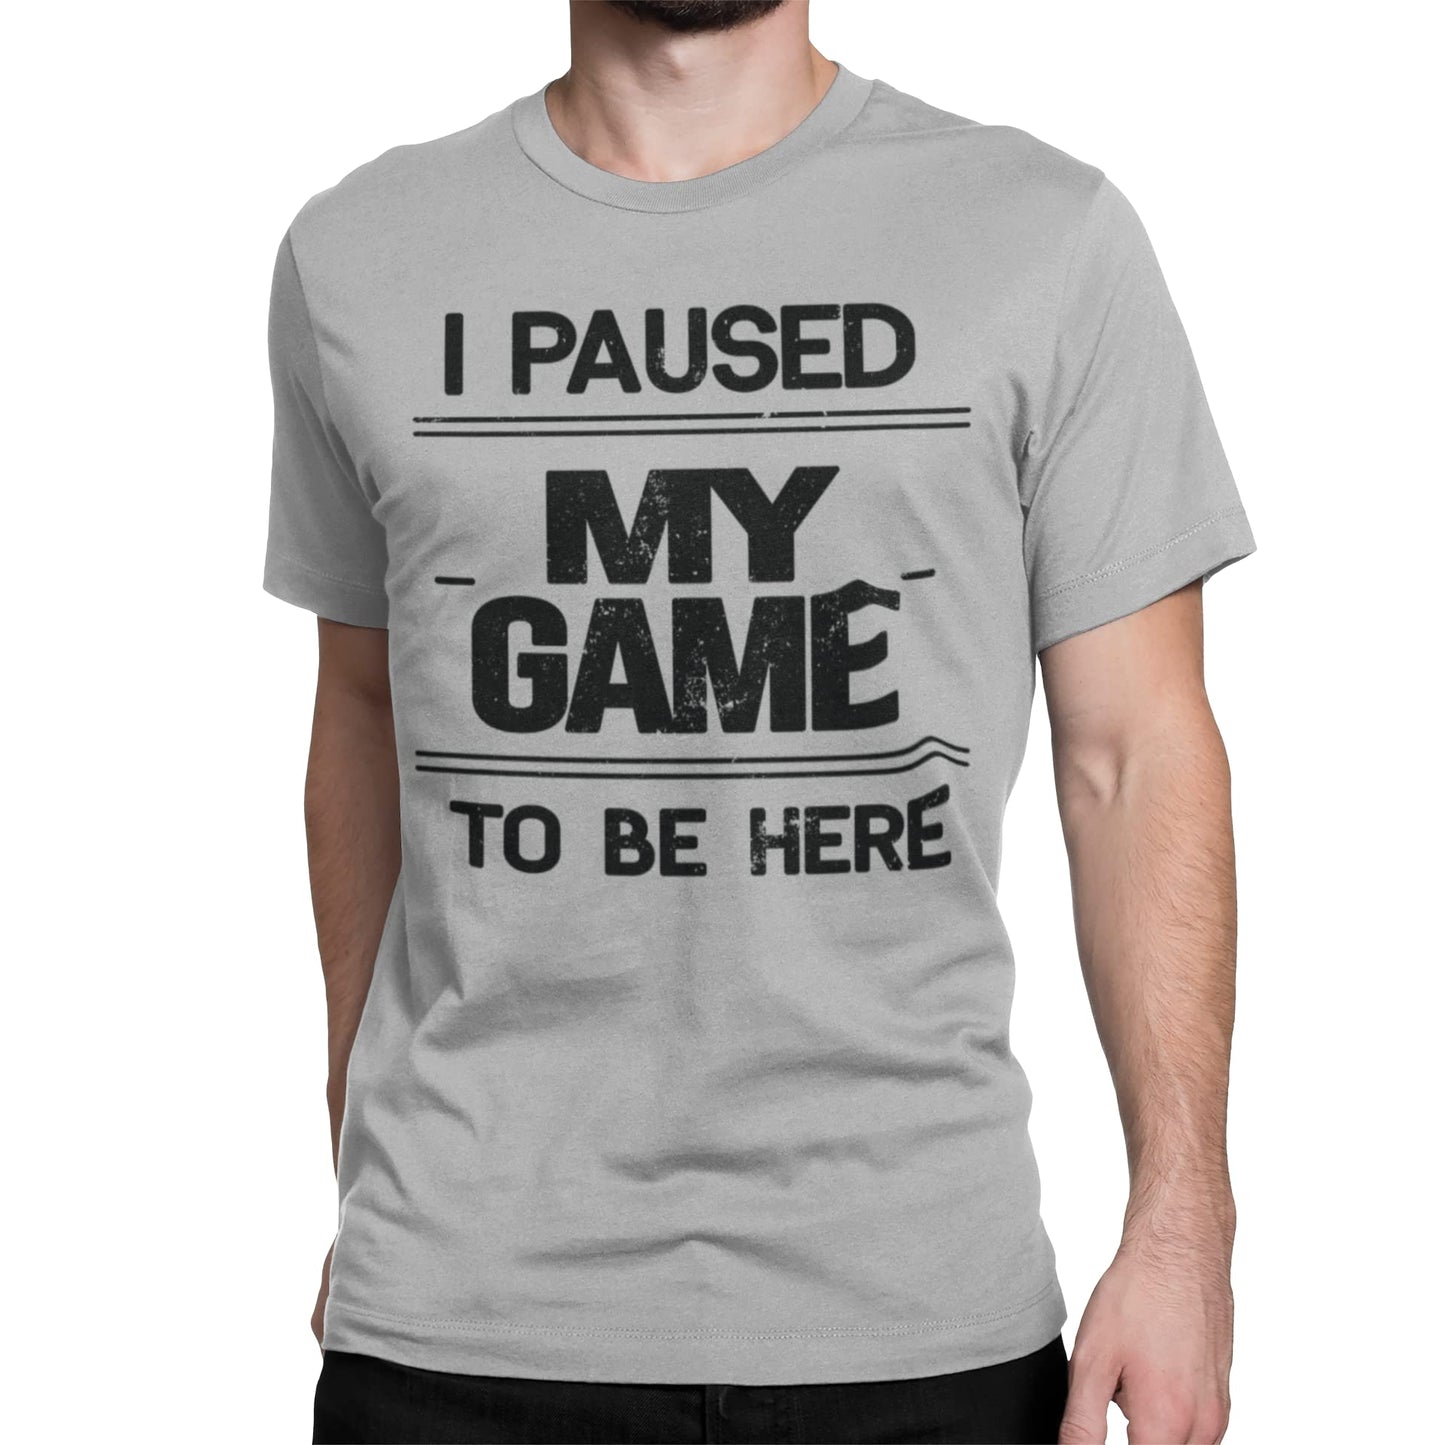 BROOKLYN VERTICAL I Paused My Game to Be Here | Funny Video Gamer Gaming Short Sleeve Crew Neck T-Shirt (as1, Alpha, s, Regular, Regular, Grey, Small)